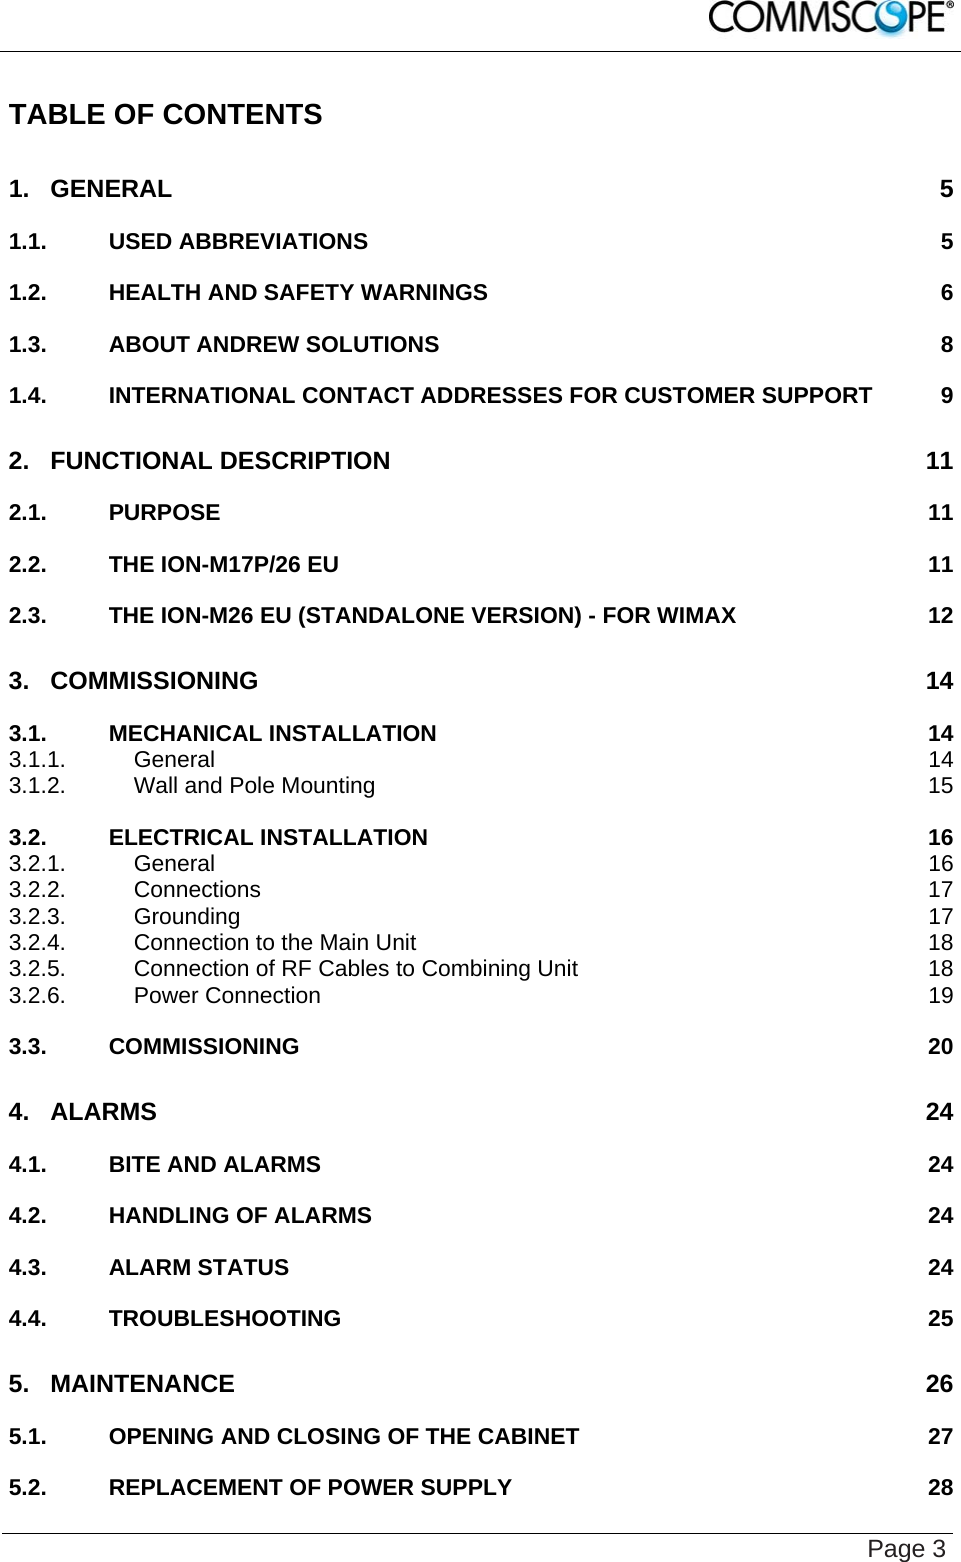    Page 3 TABLE OF CONTENTS 1. GENERAL 5 1.1. USED ABBREVIATIONS 5 1.2. HEALTH AND SAFETY WARNINGS 6 1.3. ABOUT ANDREW SOLUTIONS 8 1.4. INTERNATIONAL CONTACT ADDRESSES FOR CUSTOMER SUPPORT 9 2. FUNCTIONAL DESCRIPTION 11 2.1. PURPOSE 11 2.2. THE ION-M17P/26 EU 11 2.3. THE ION-M26 EU (STANDALONE VERSION) - FOR WIMAX 12 3. COMMISSIONING 14 3.1. MECHANICAL INSTALLATION 14 3.1.1. General 14 3.1.2. Wall and Pole Mounting 15 3.2. ELECTRICAL INSTALLATION 16 3.2.1. General 16 3.2.2. Connections 17 3.2.3. Grounding 17 3.2.4. Connection to the Main Unit 18 3.2.5. Connection of RF Cables to Combining Unit 18 3.2.6. Power Connection 19 3.3. COMMISSIONING 20 4. ALARMS 24 4.1. BITE AND ALARMS 24 4.2. HANDLING OF ALARMS 24 4.3. ALARM STATUS 24 4.4. TROUBLESHOOTING 25 5. MAINTENANCE 26 5.1. OPENING AND CLOSING OF THE CABINET 27 5.2. REPLACEMENT OF POWER SUPPLY 28 